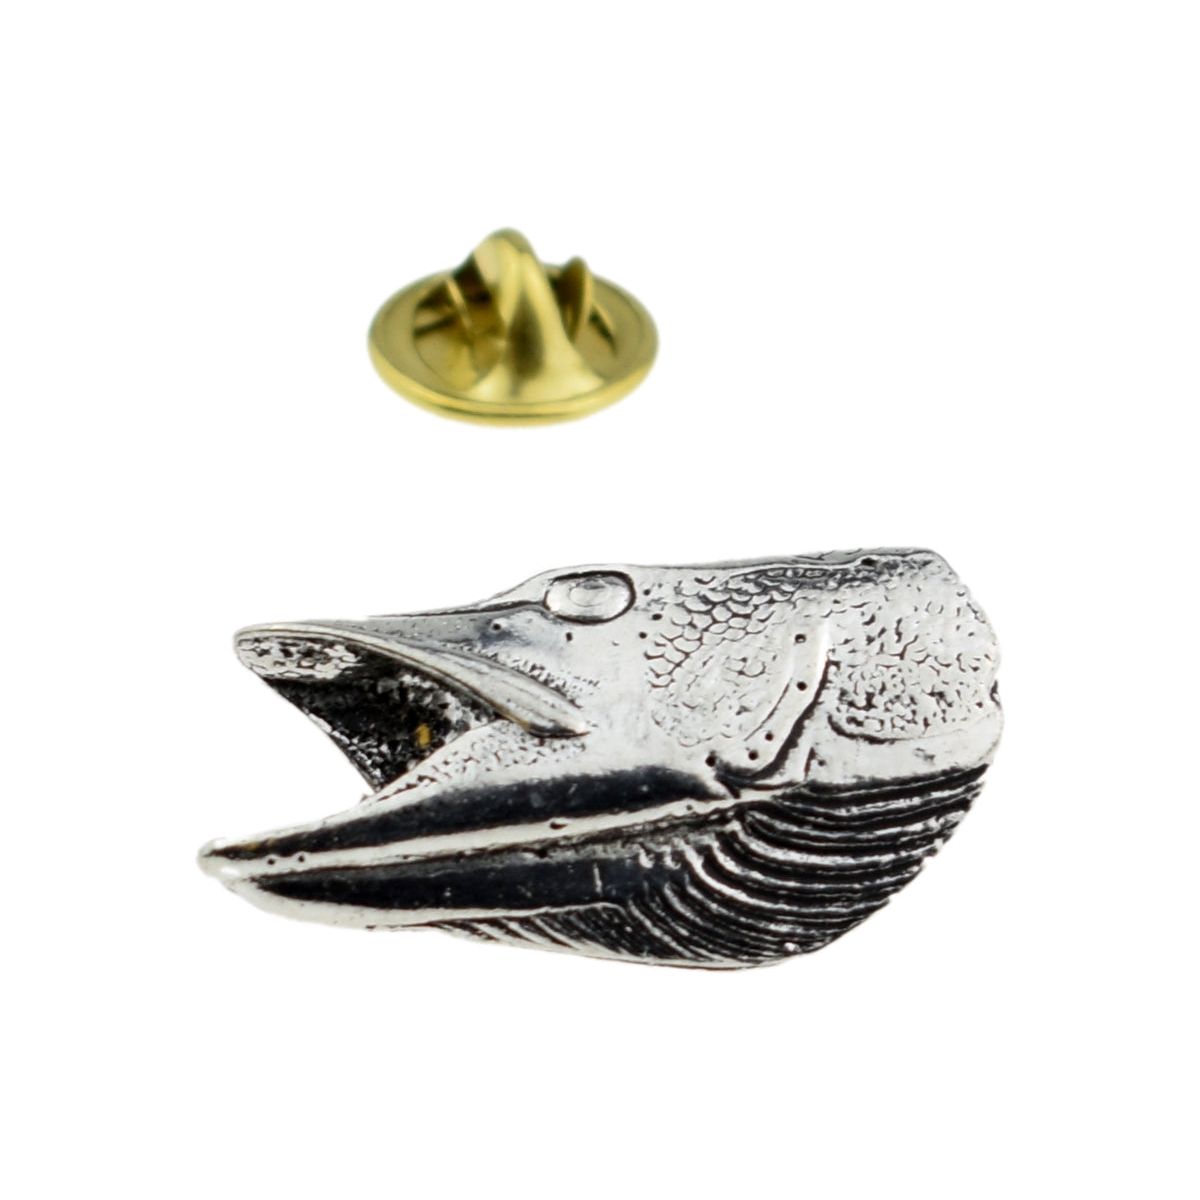 Pike's Head Fishing Pewter Lapel Pin Badge - Ashton and Finch